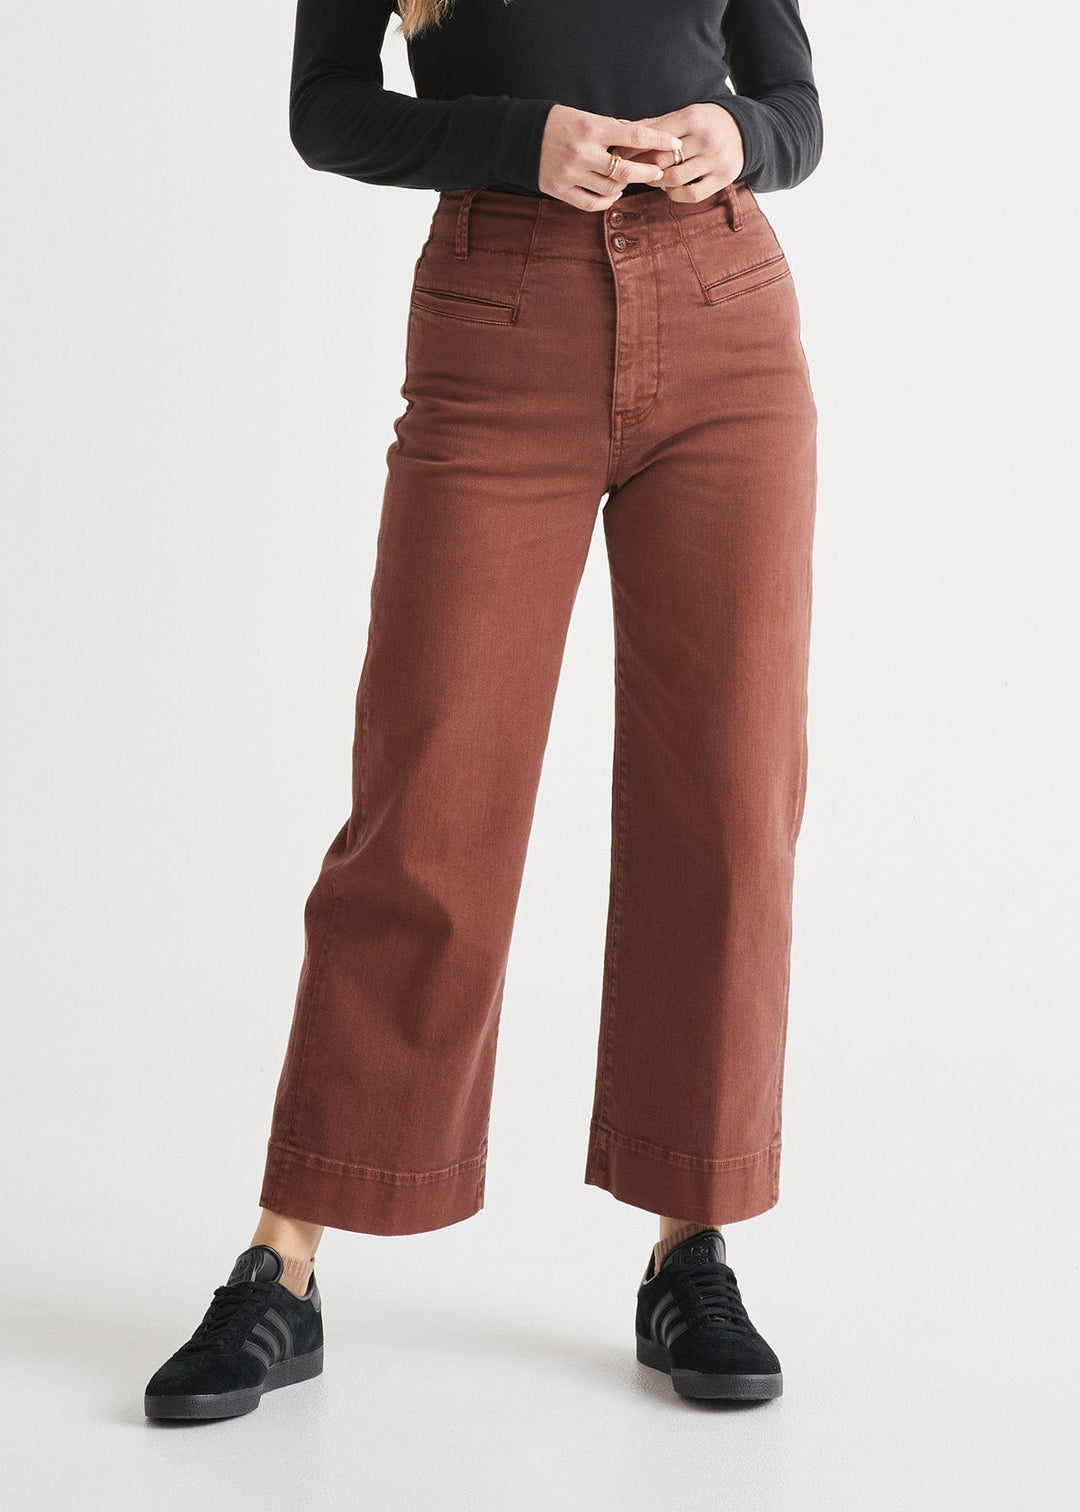 Duer Women's LuxTwill High Rise 28" Pants